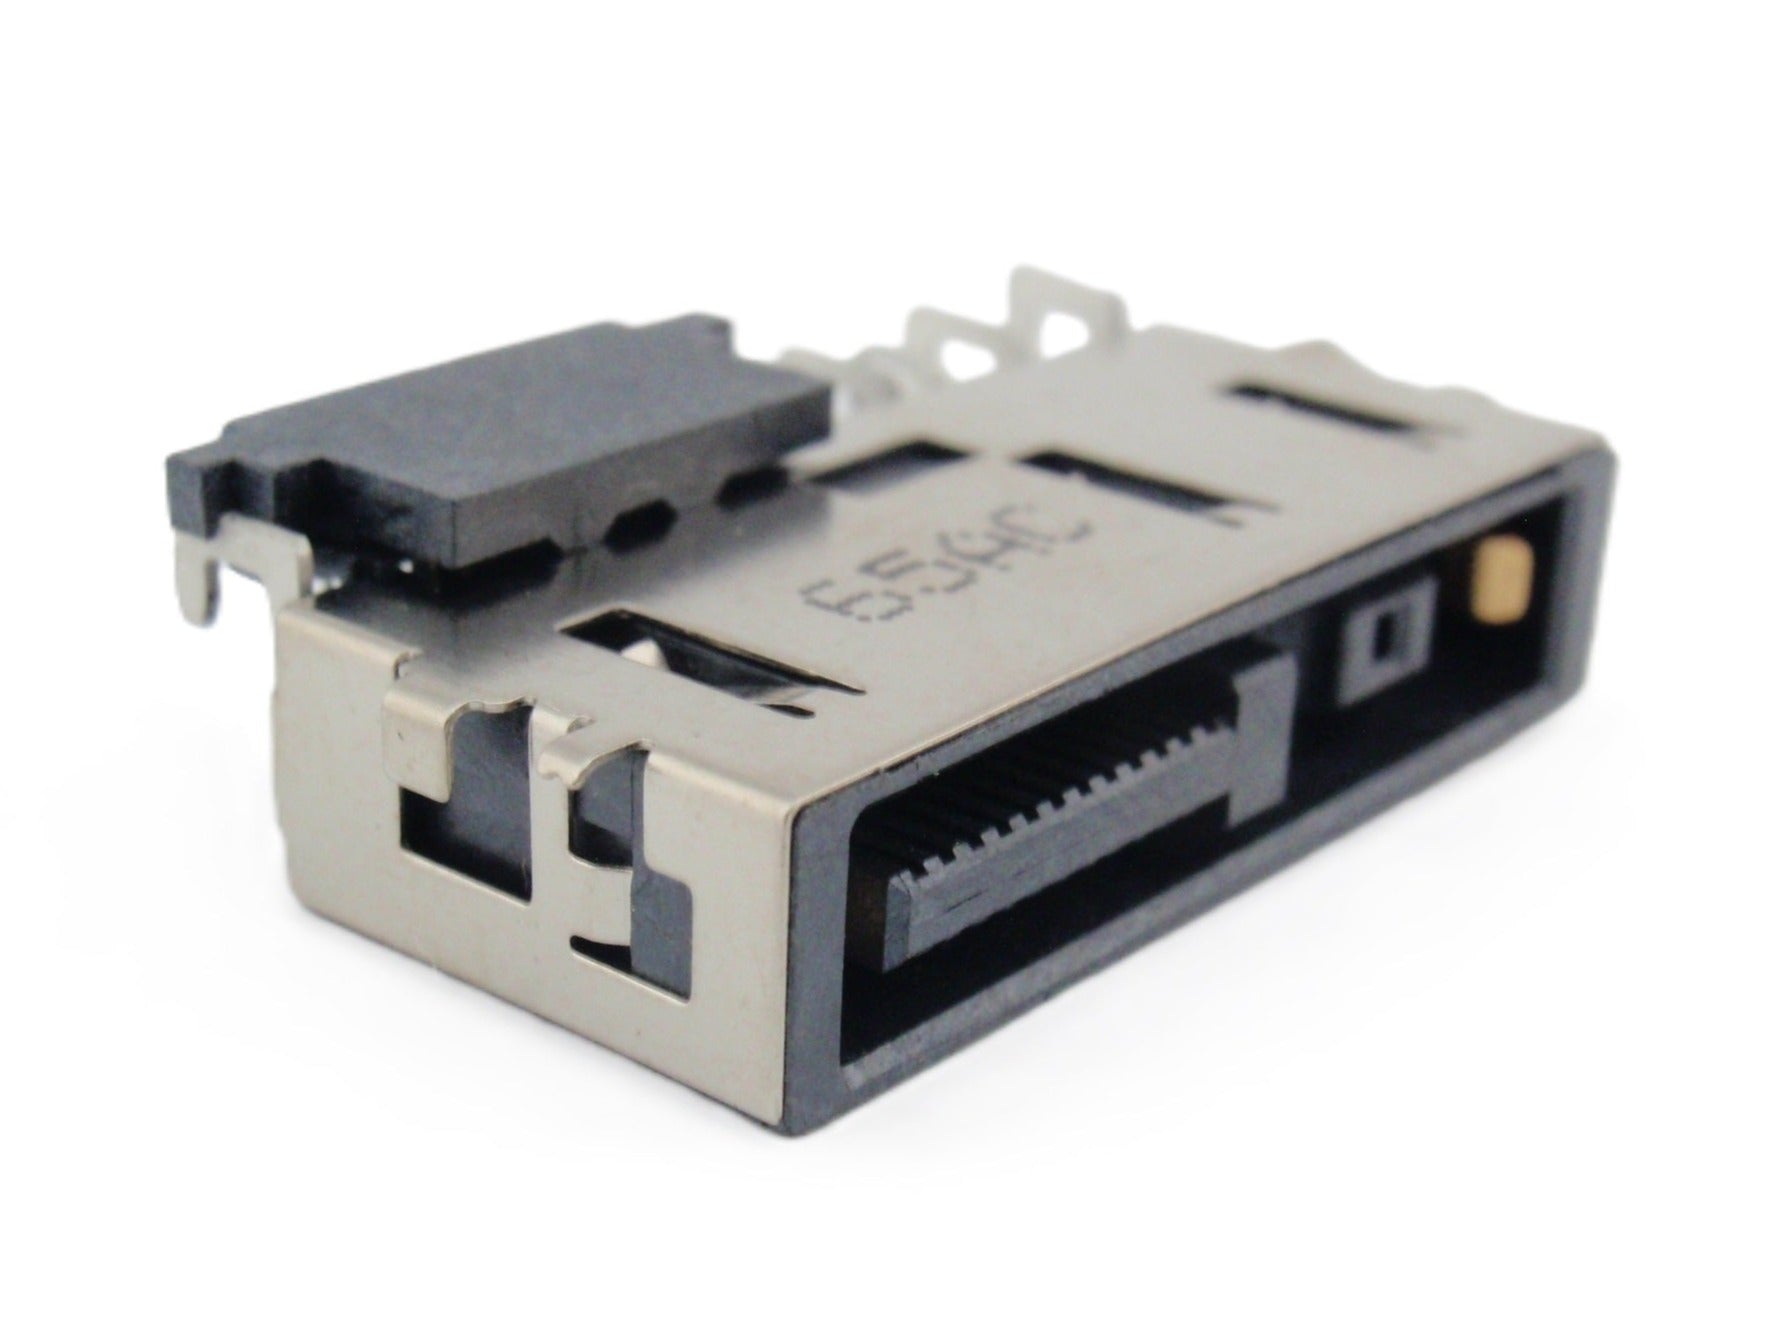 Lenovo New DC In Power Jack Charging Port Connector ThinkPad S3 Yoga 14 E450 E455 E465 E550 E555 E560 E565 X1 Carbon 2nd Gen NS-A221 00HT632